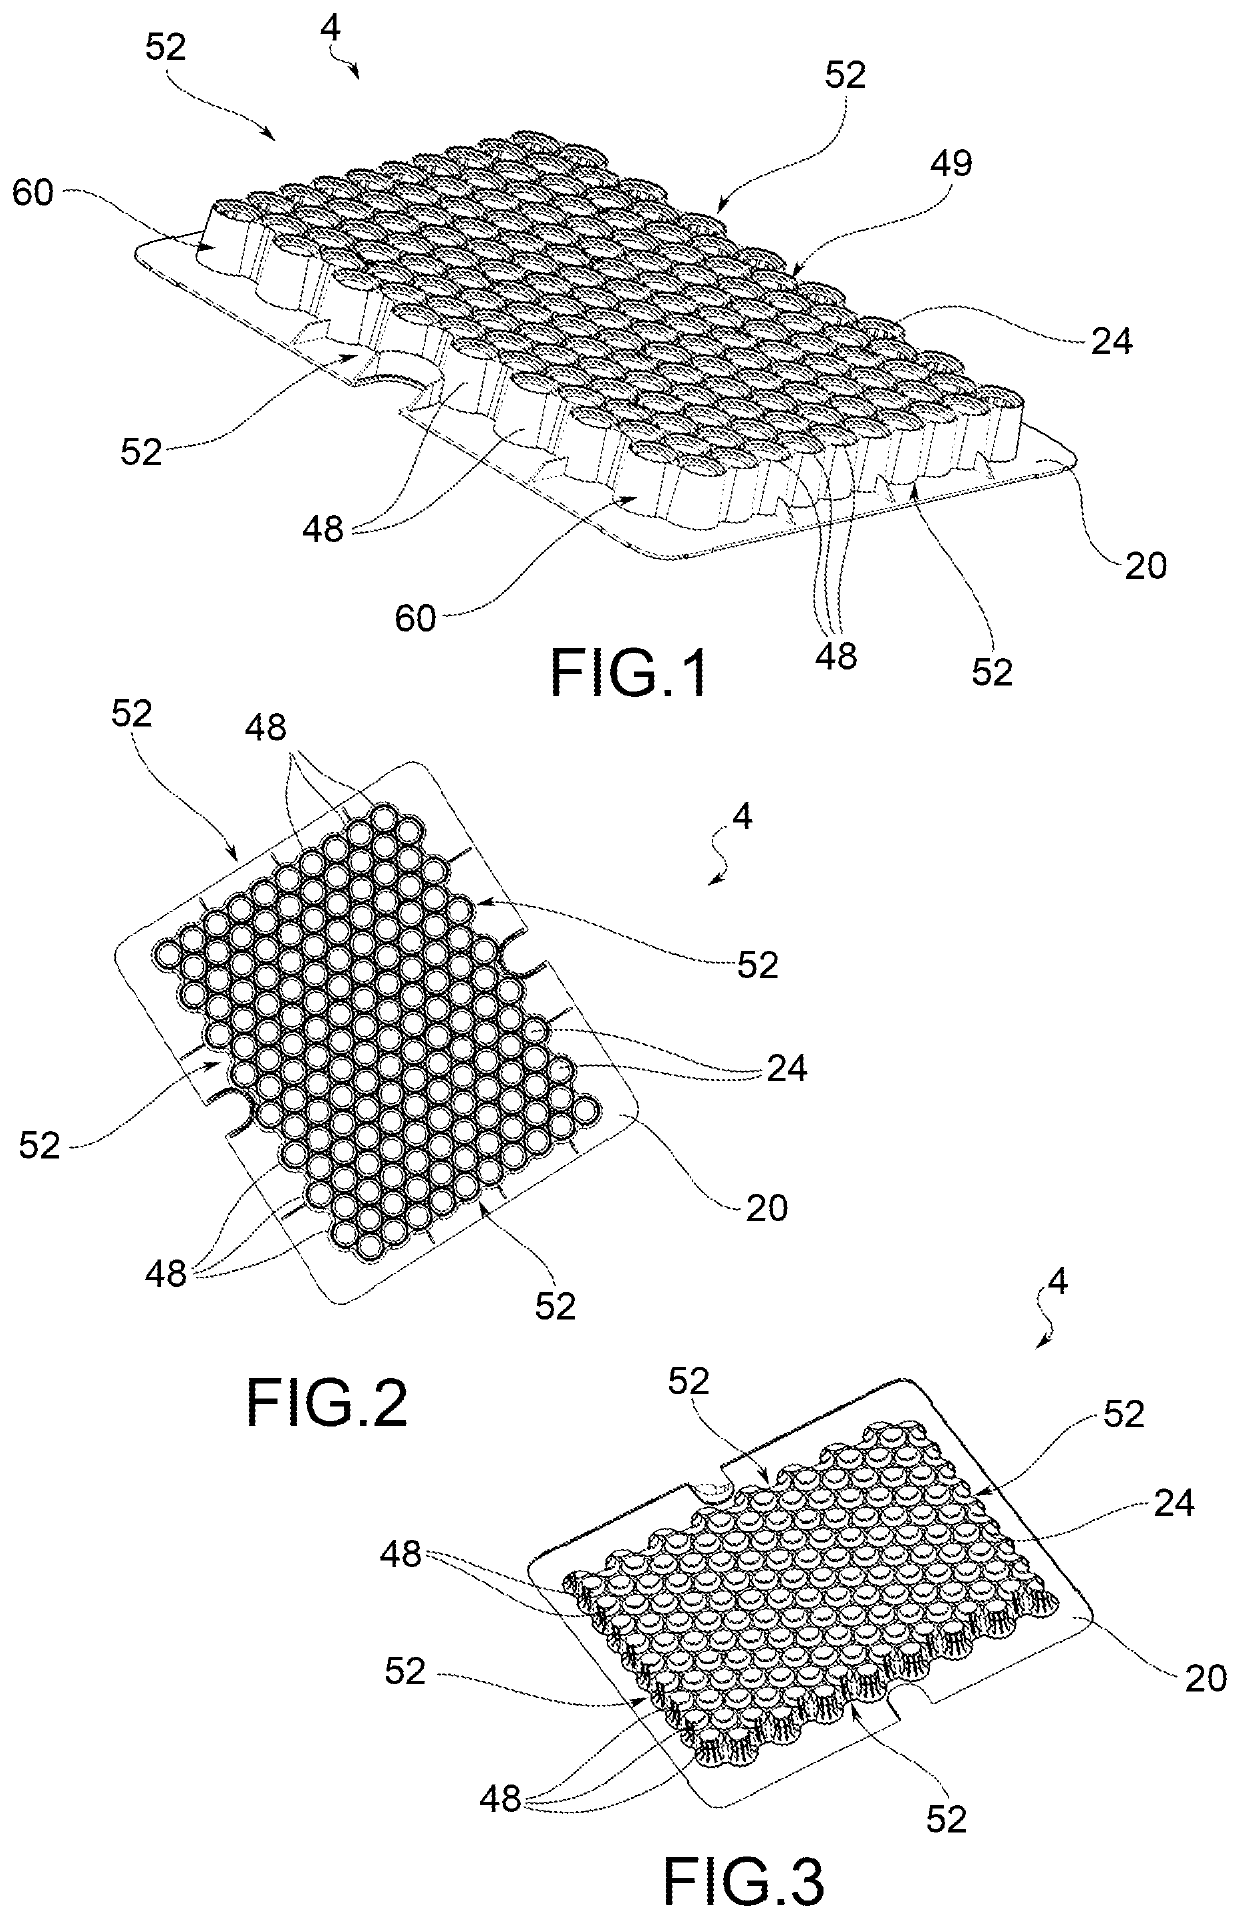 Structure for the packing of primary containers for pharmaceutical use